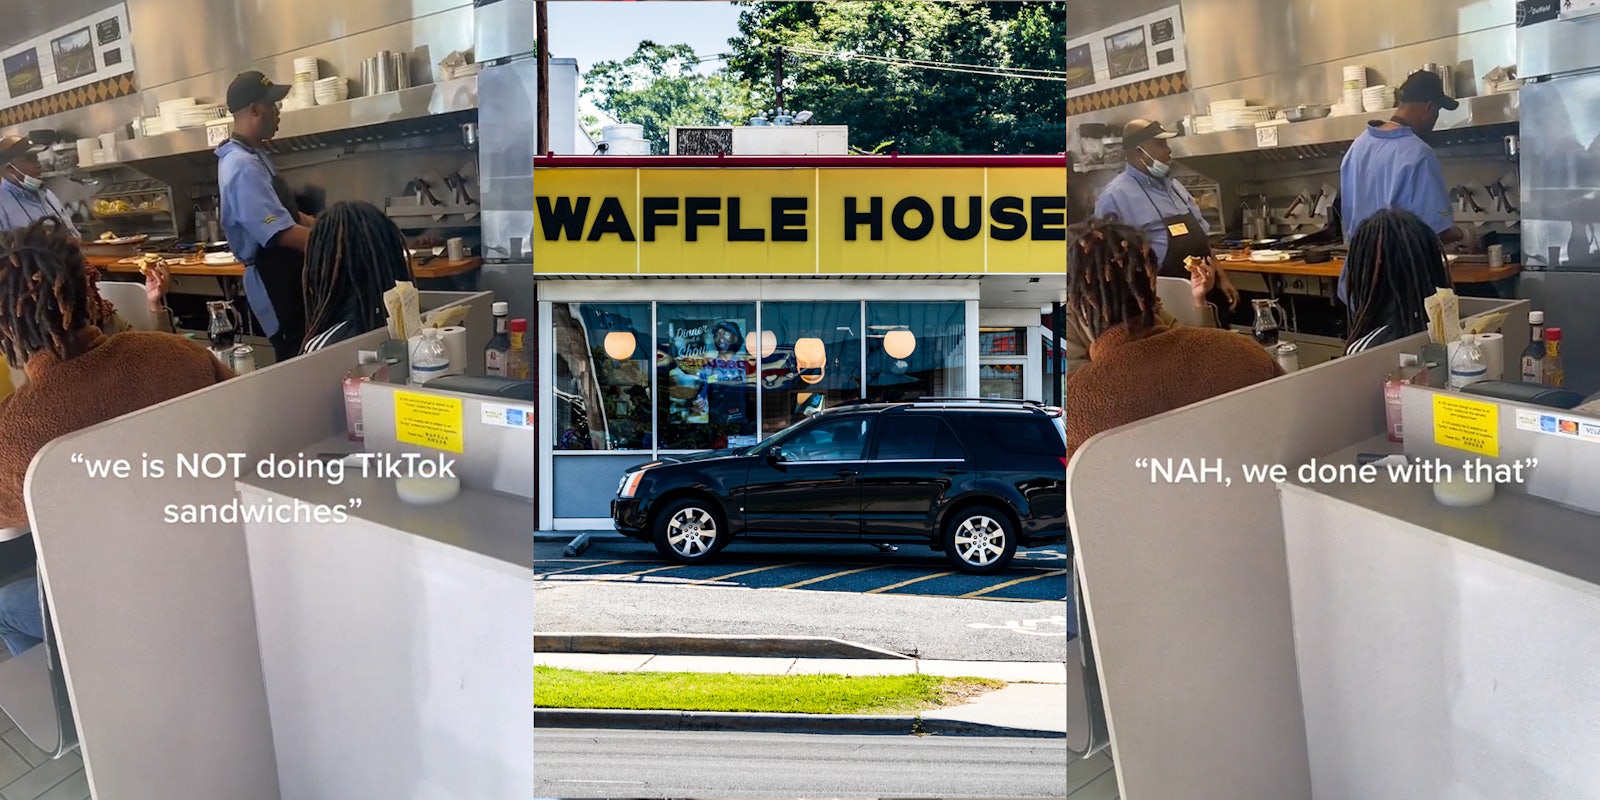 Waffle House employee speaking with caption ''we is NOT doing TikTok sandwiches'' (l) Waffle House building with sign (c) Waffle House employee speaking with caption ''NAH, we done with that'' (r)